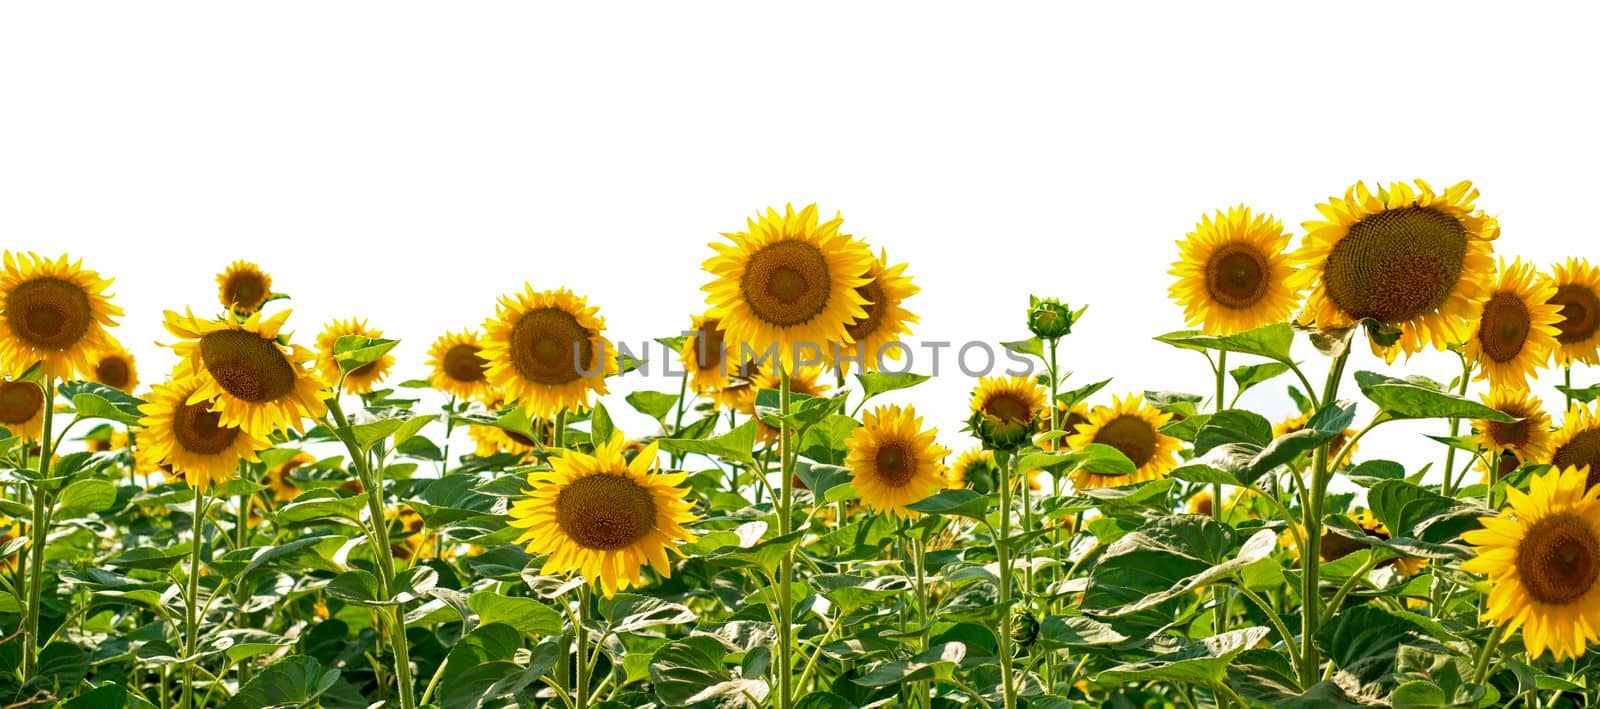 beautiful natural background with a field of blooming sunflowers on a sunny day by aprilphoto